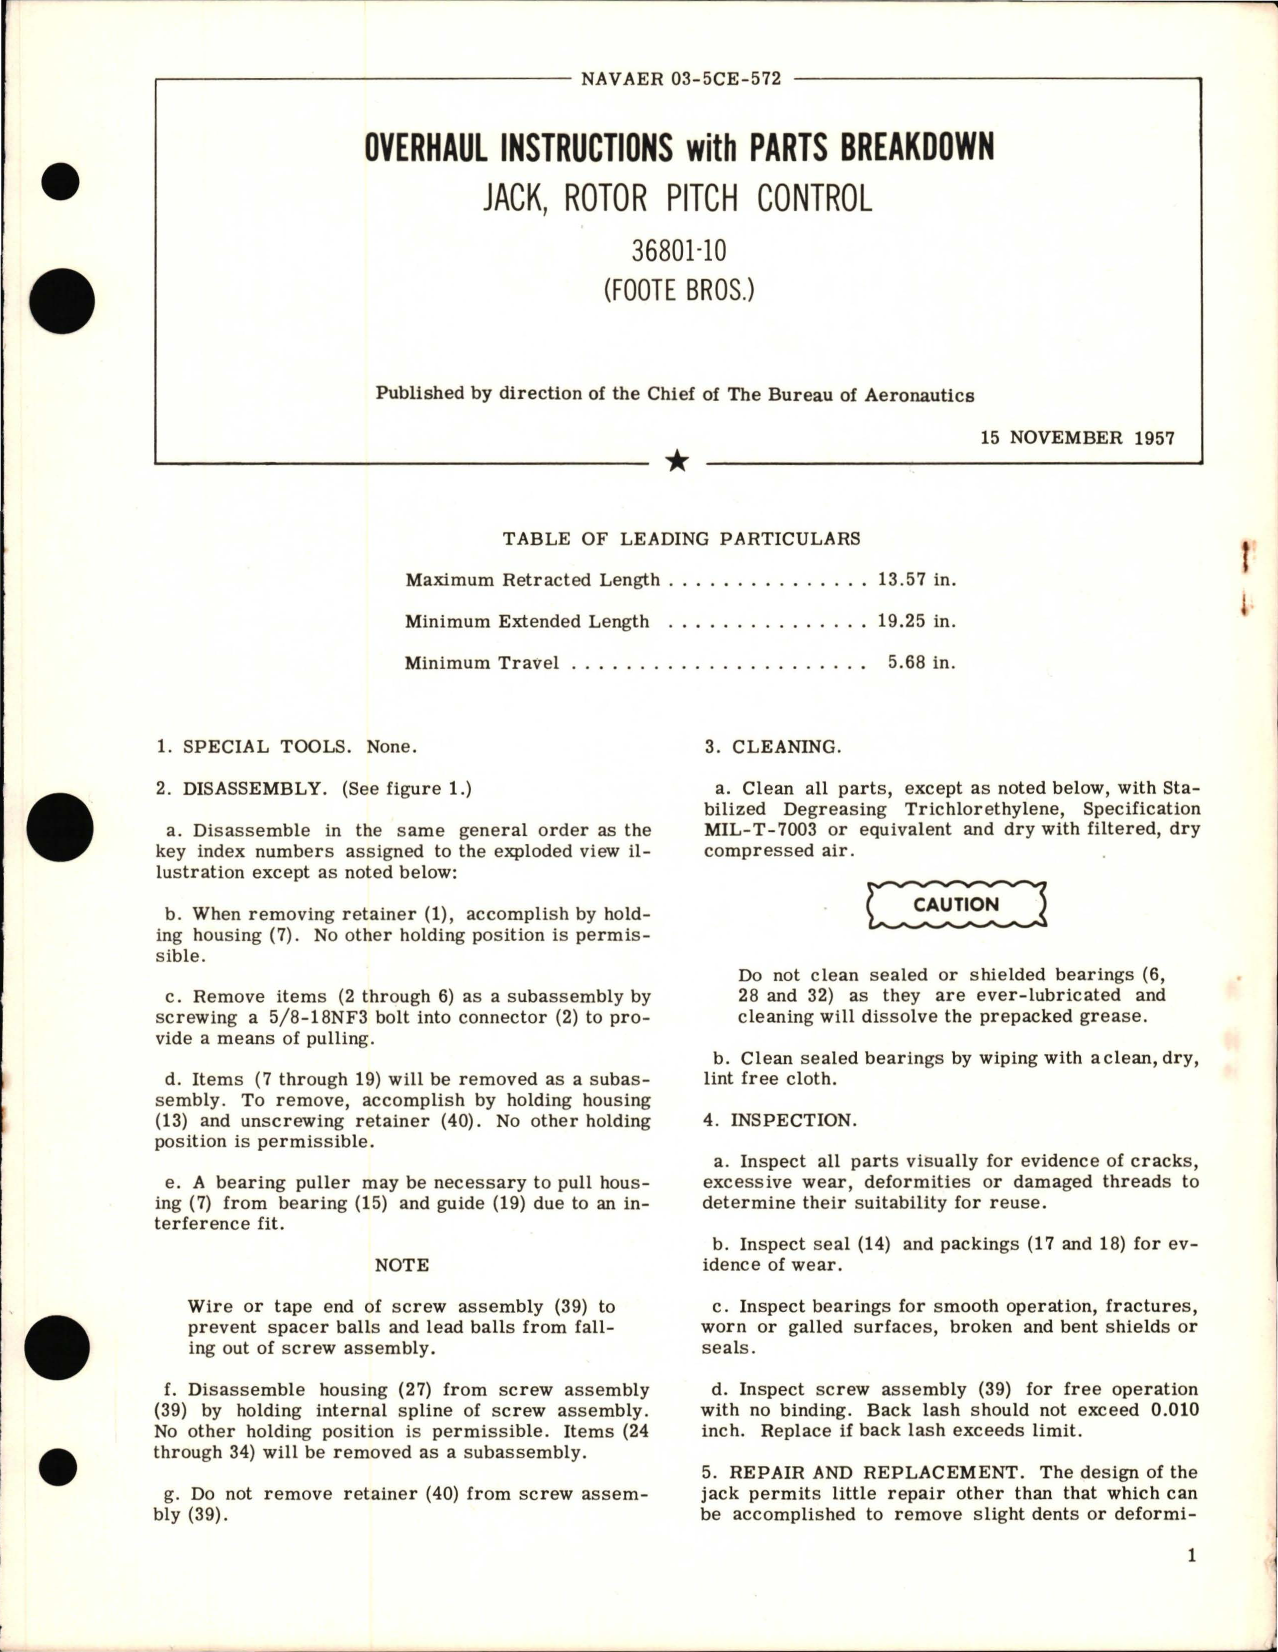 Sample page 1 from AirCorps Library document: Overhaul Instructions with Parts Breakdown for Jack, Rotor Pitch Control 36801-10 